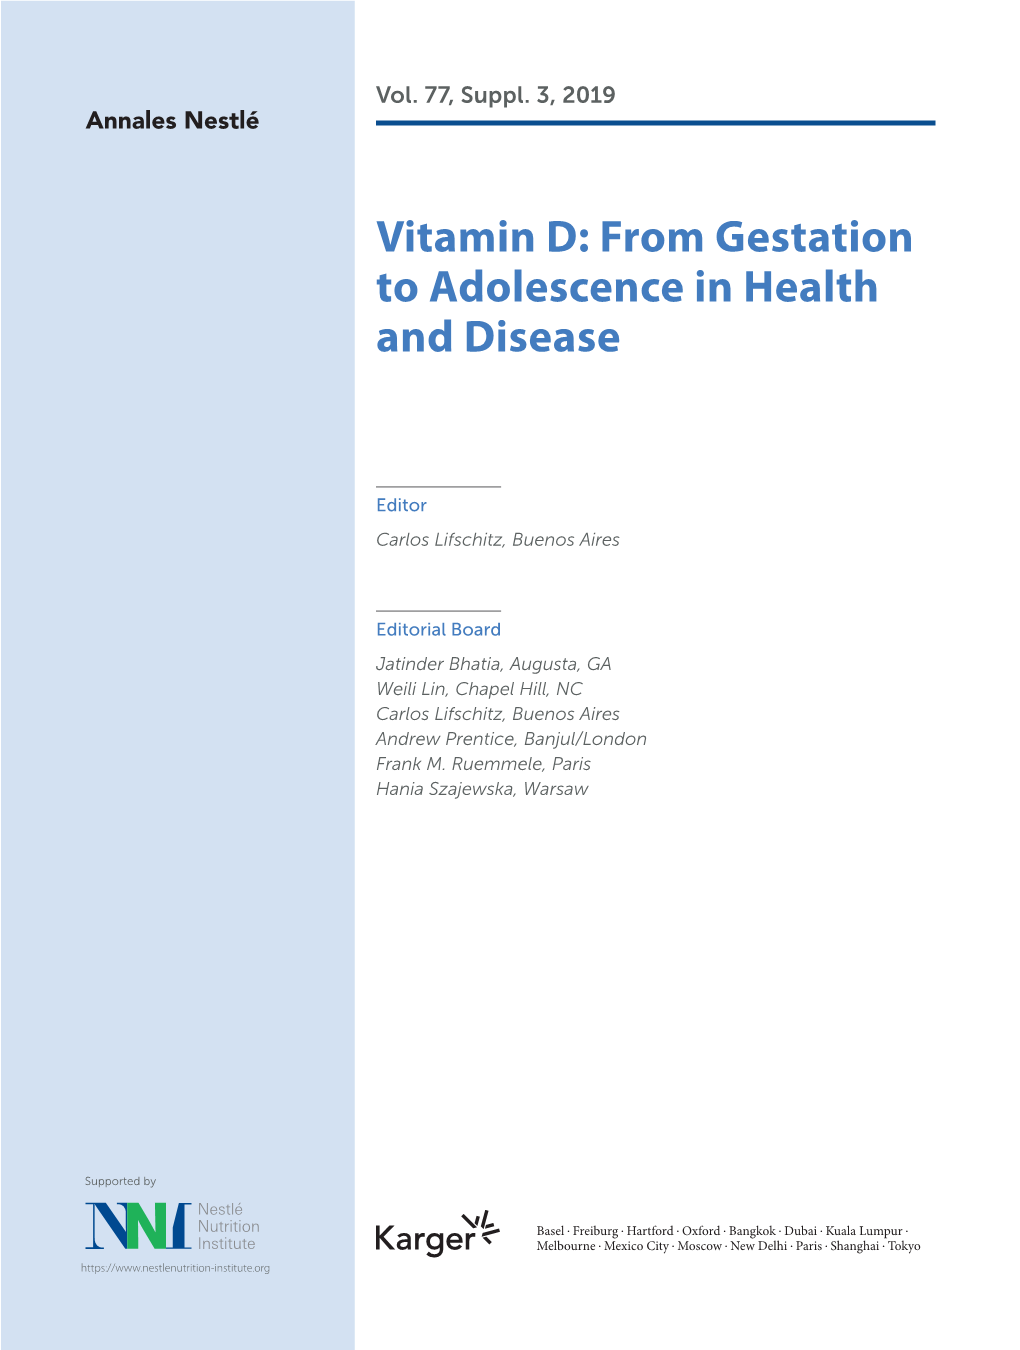 Vitamin D: from Gestation to Adolescence in Health and Disease